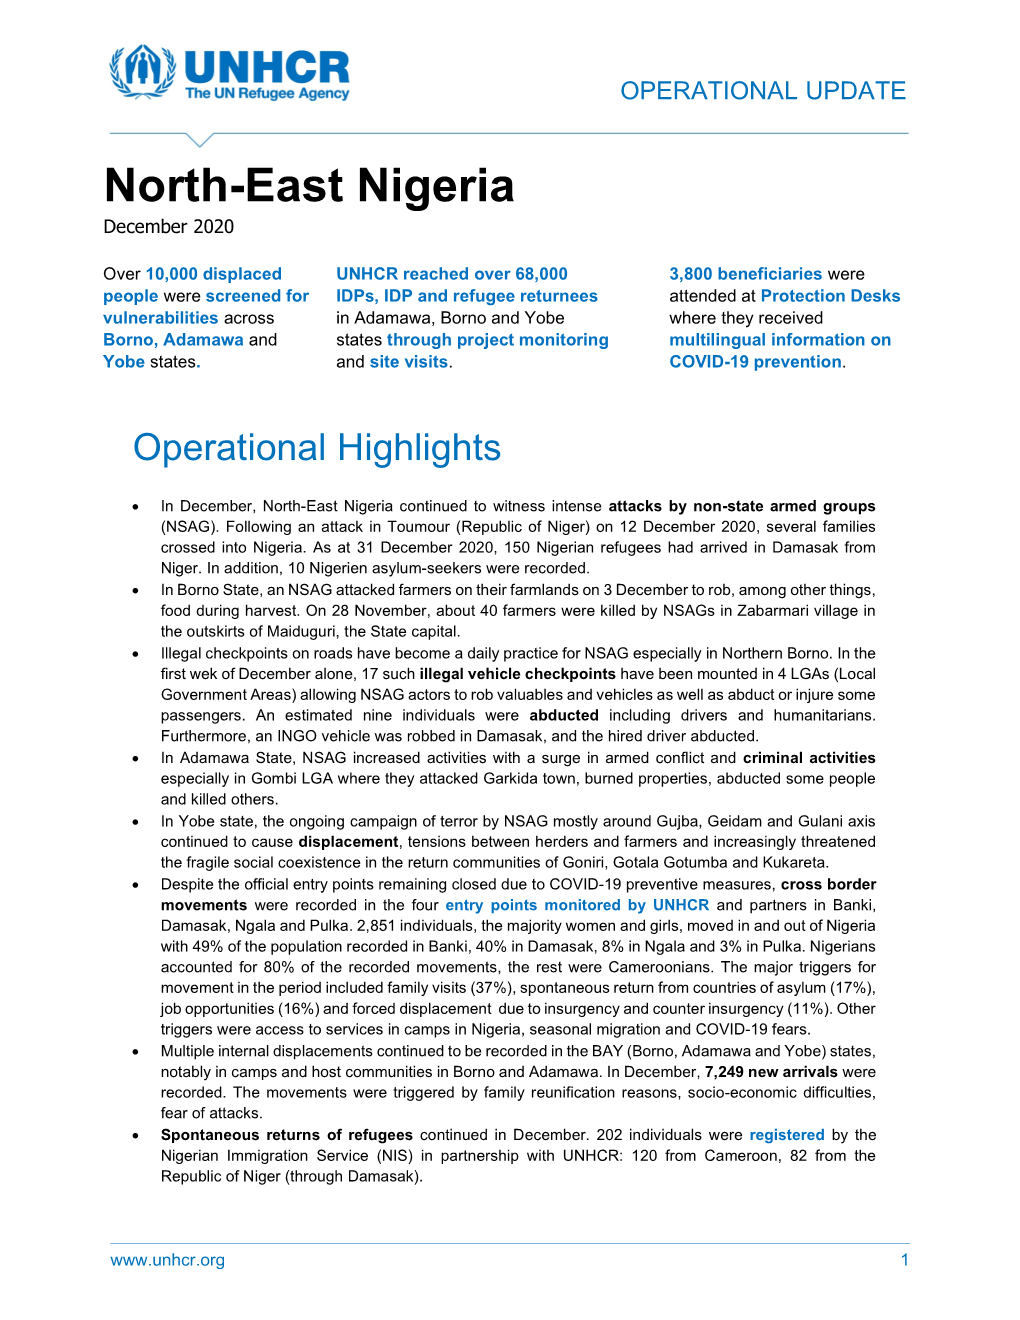 North-East Nigeria Continued to Witness Intense Attacks by Non-State Armed Groups (NSAG)